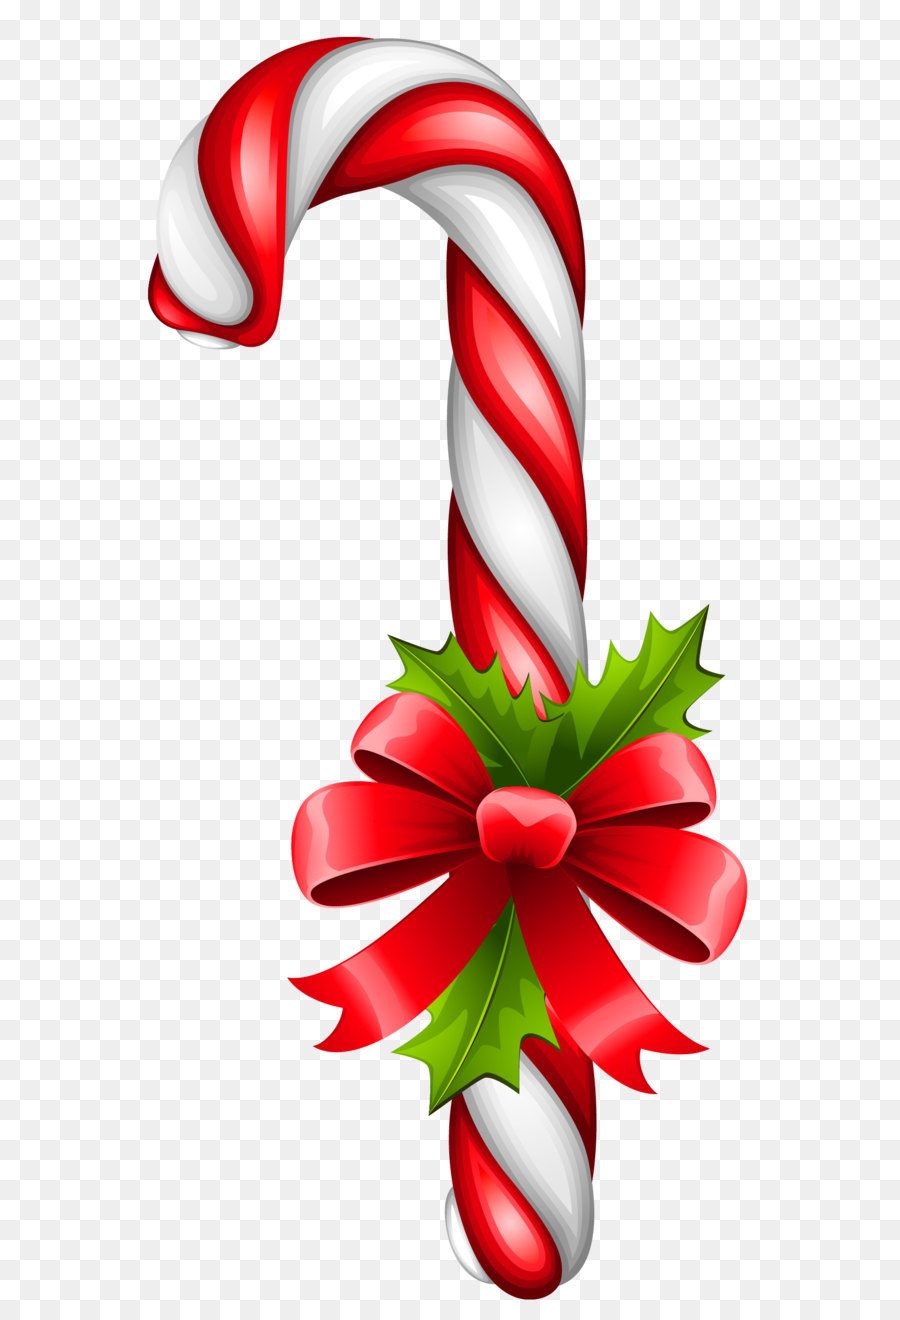 Candy cane Christmas Clip art - Christmas candy PNG png download - 1269*2573 - Free Transparent Candy Cane png Download.